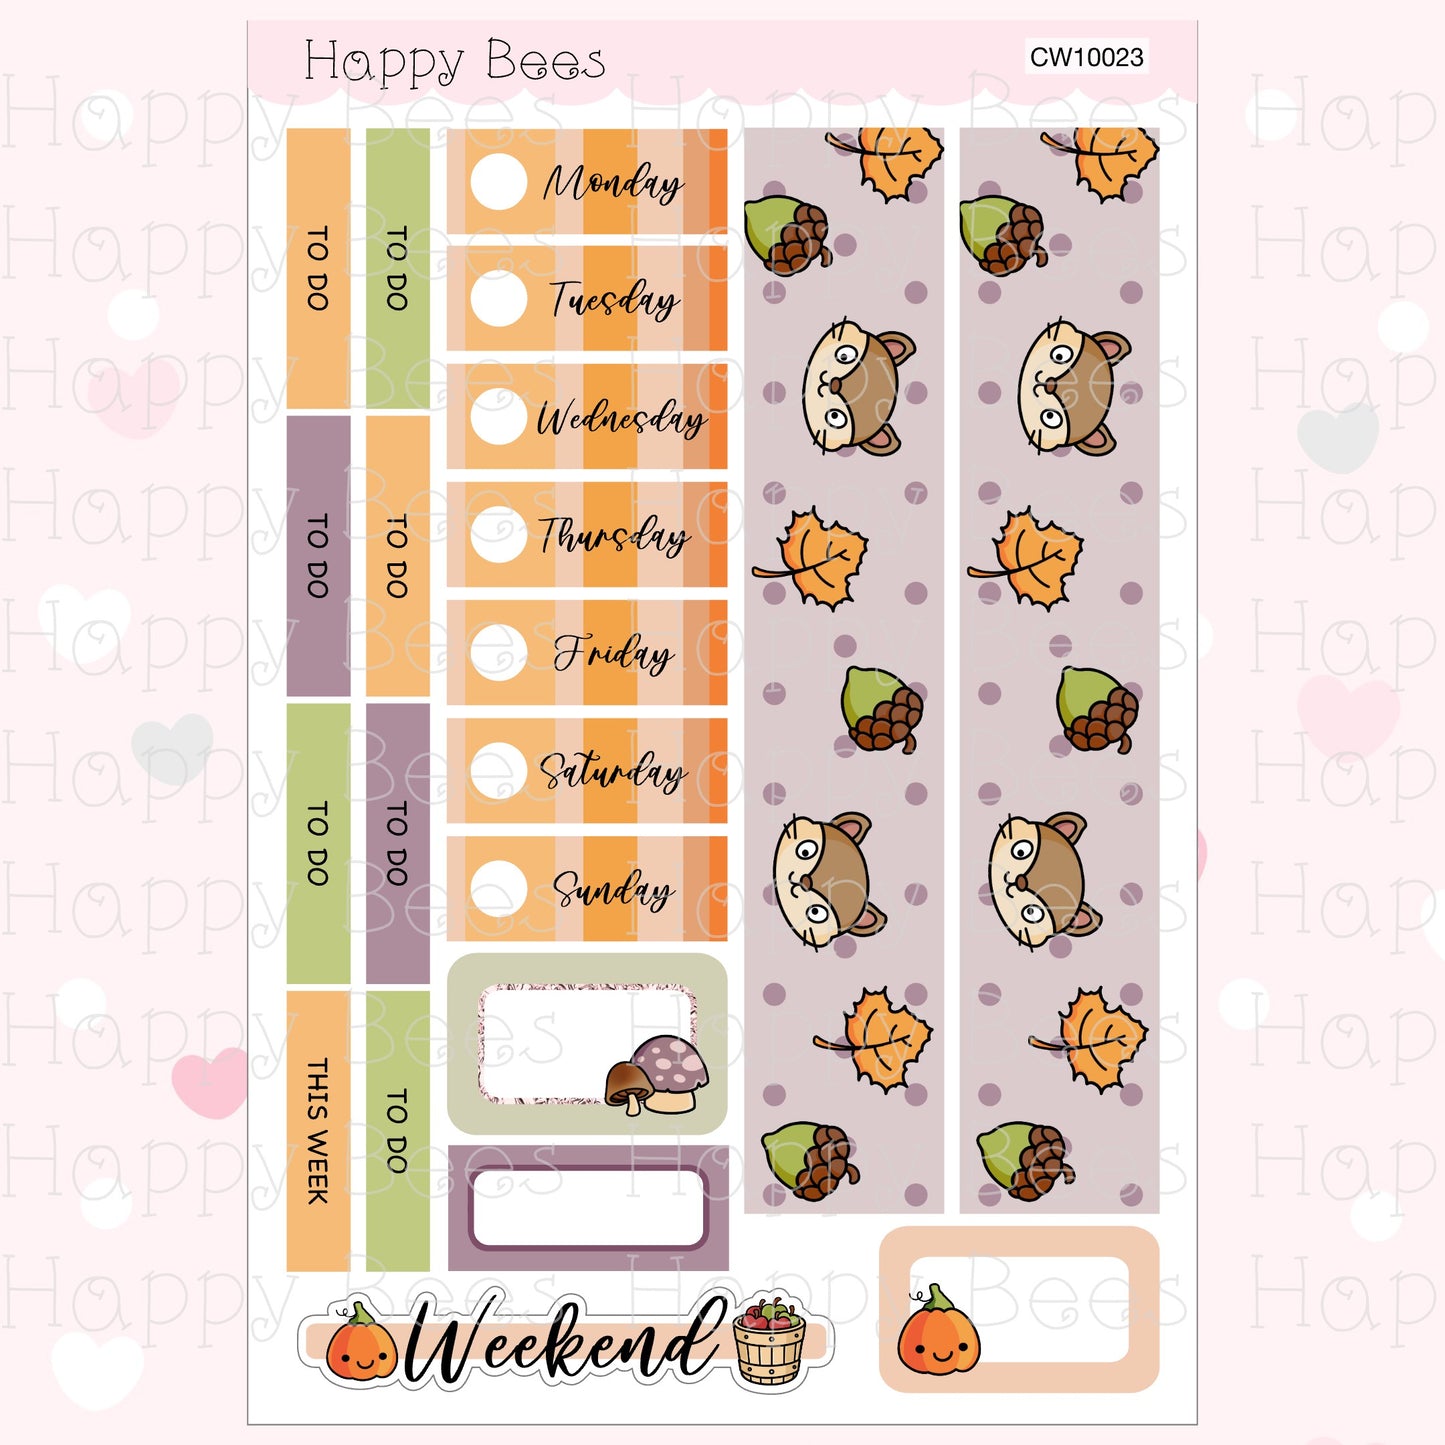 Forest Dream - Hobonichi Cousin Weekly Planner Sticker Kit CW10023